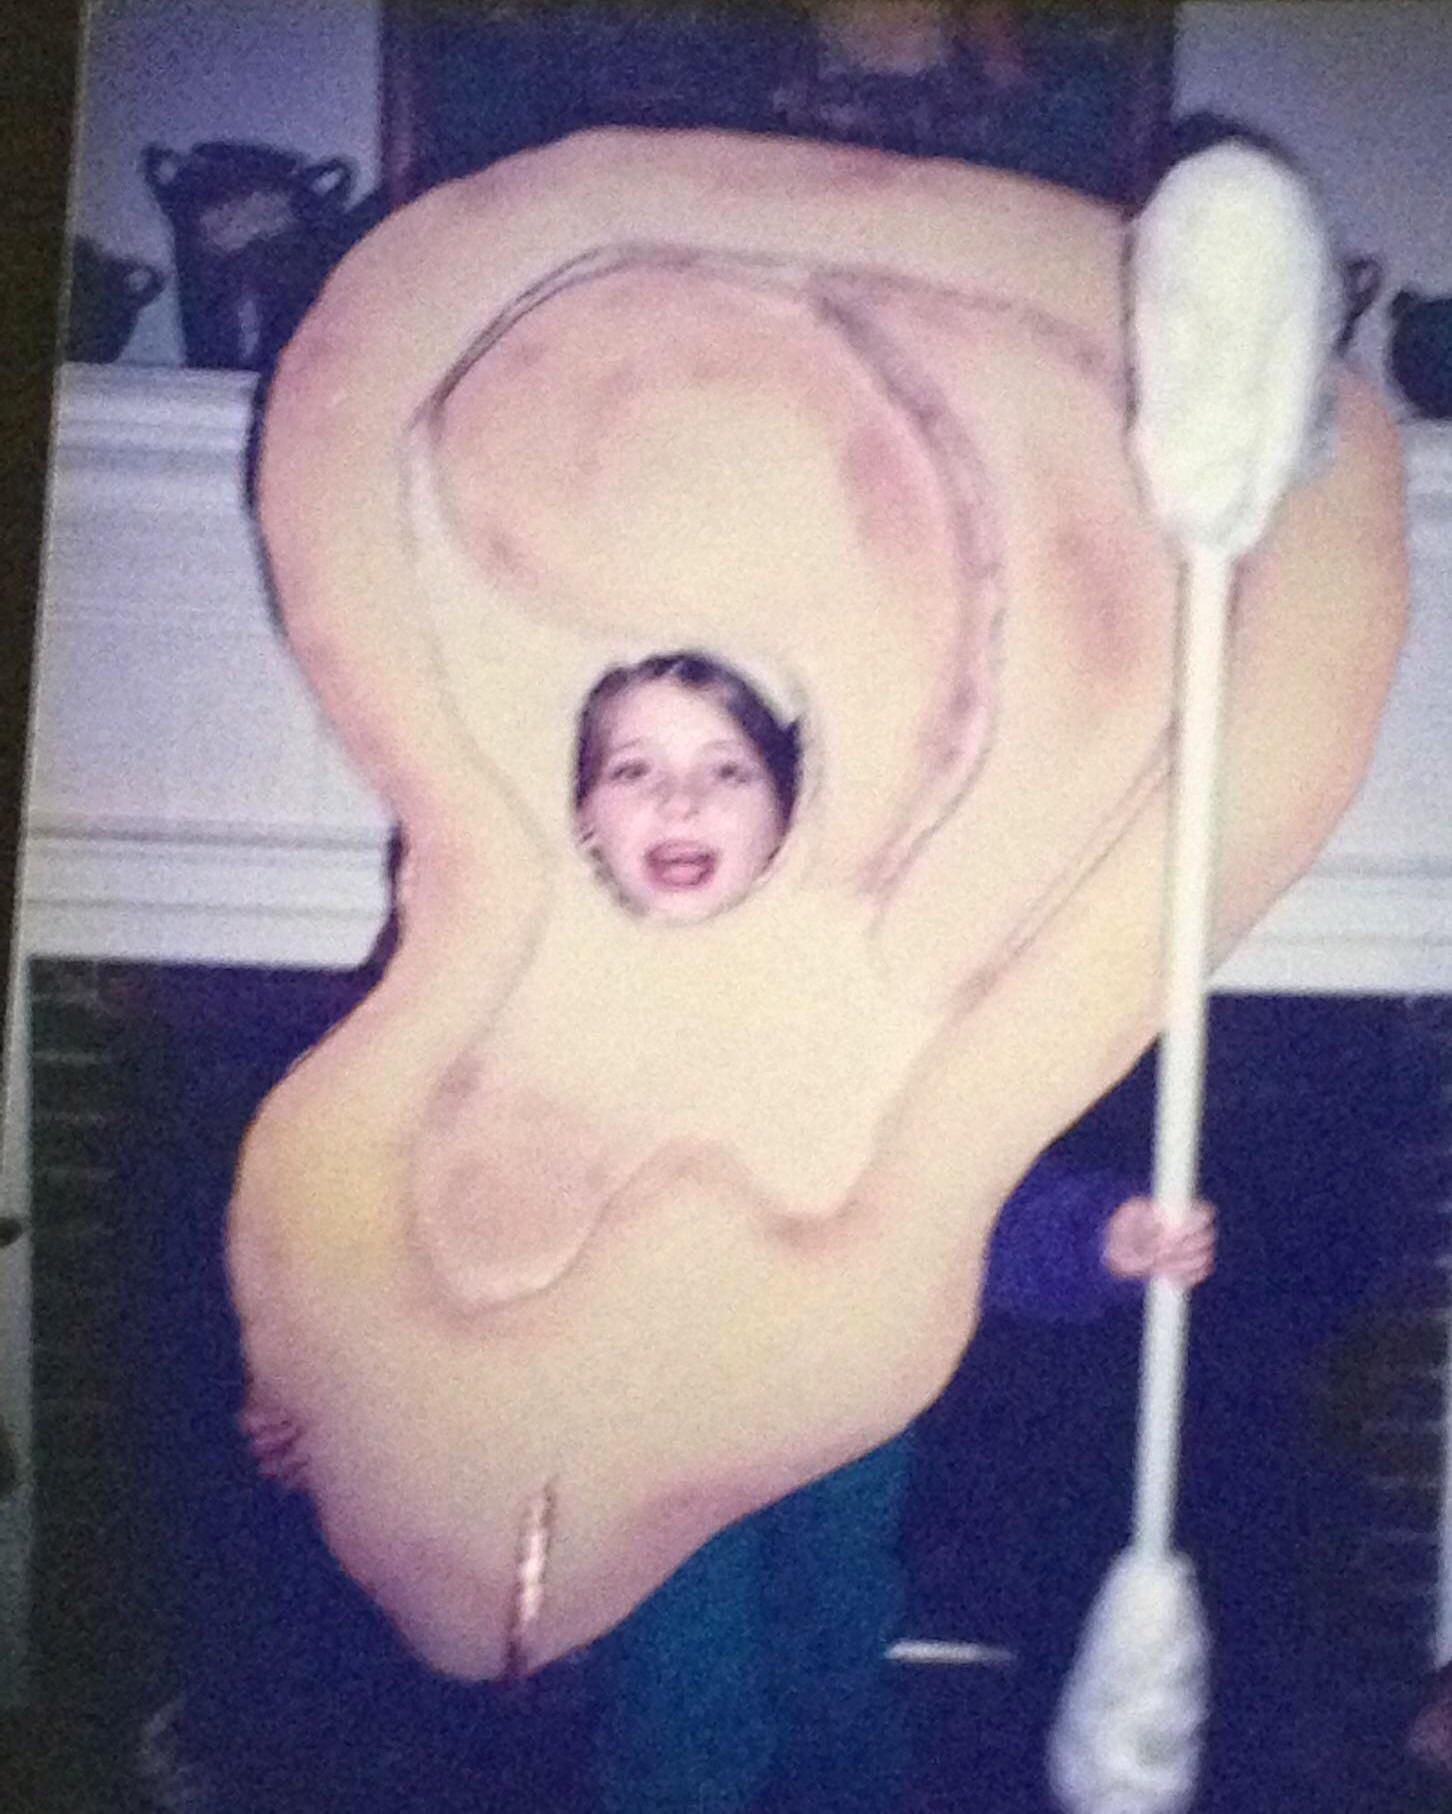 In 1994, I told my dad I wanted to be an ear for Halloween. He really came through.